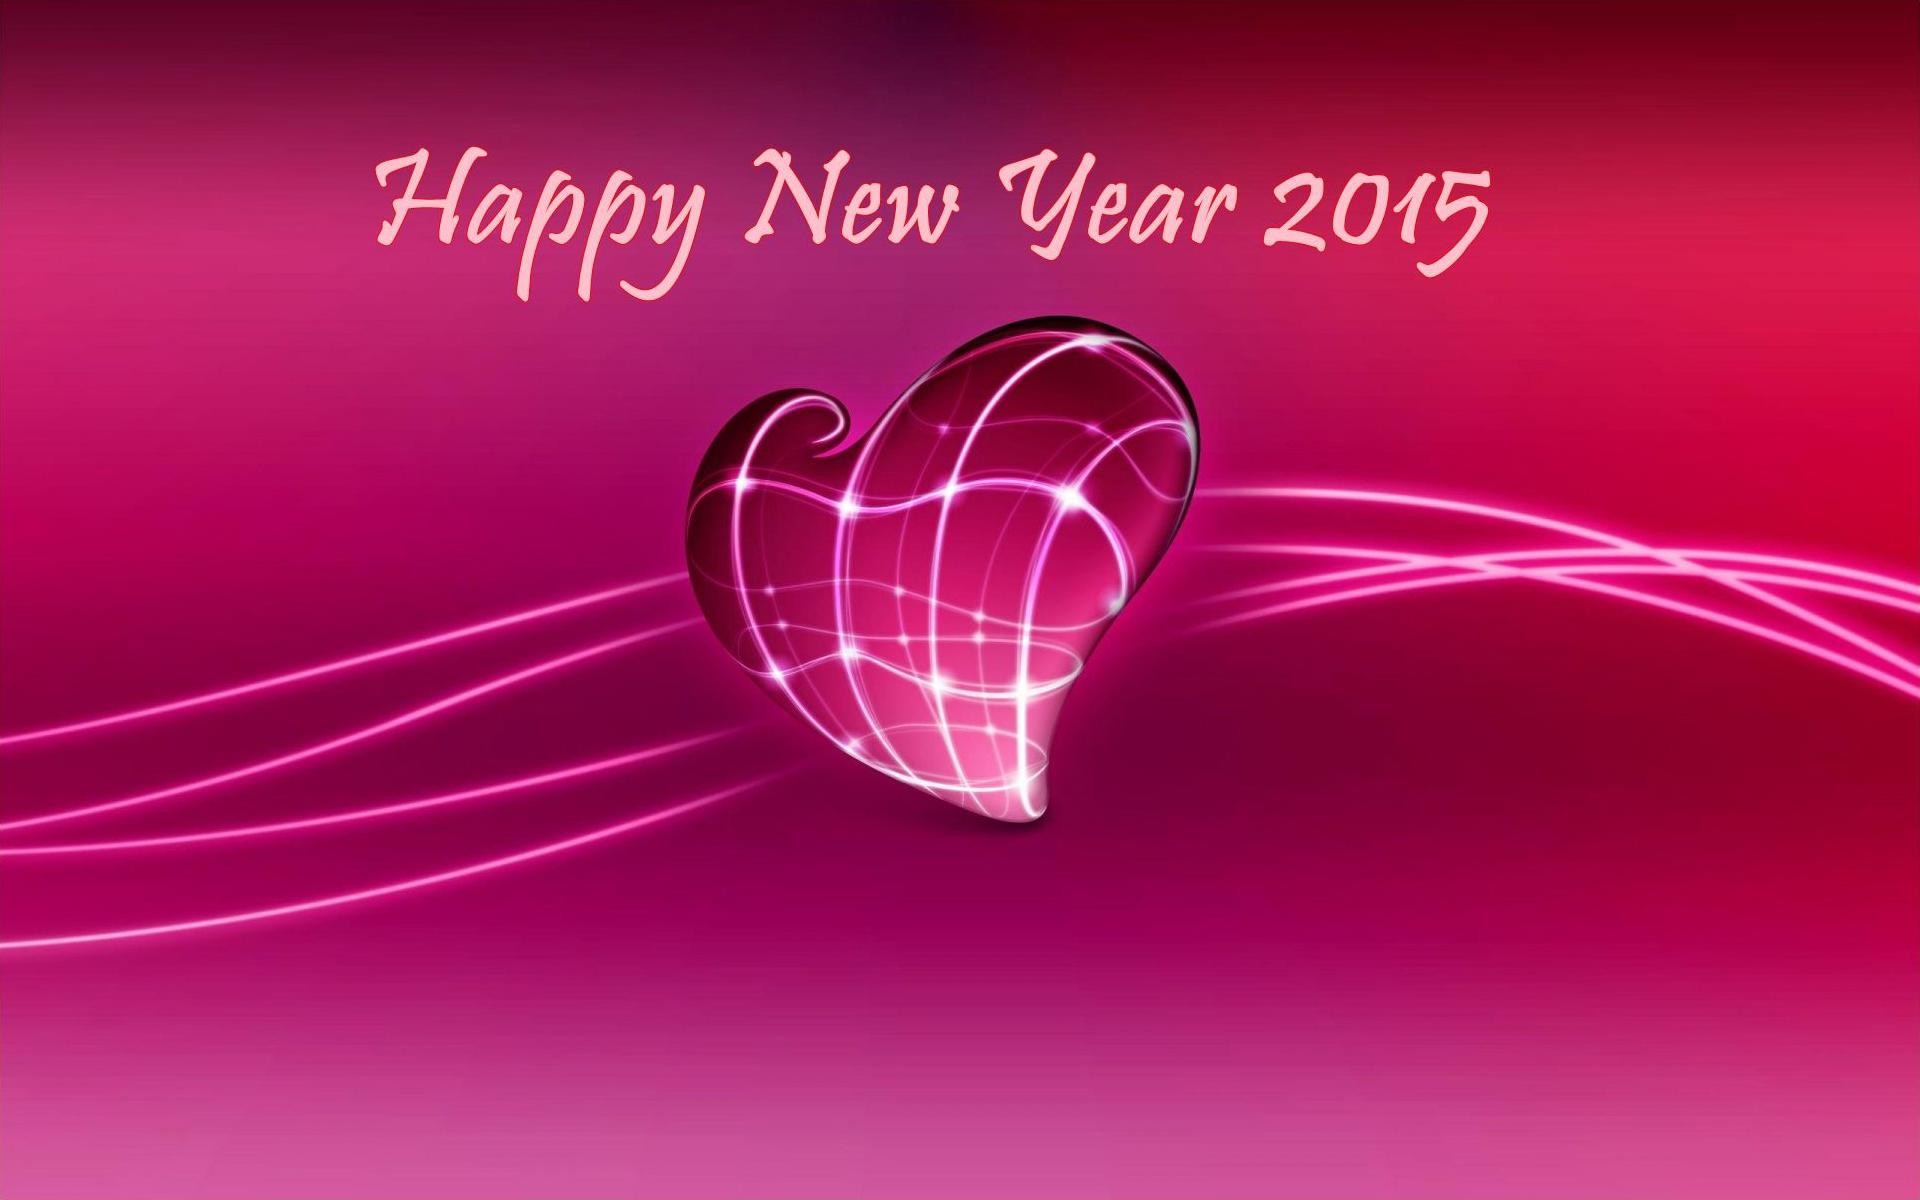 1920x1200 nice best high definition 3d wallpapers for desktop hd love image with  message for new year